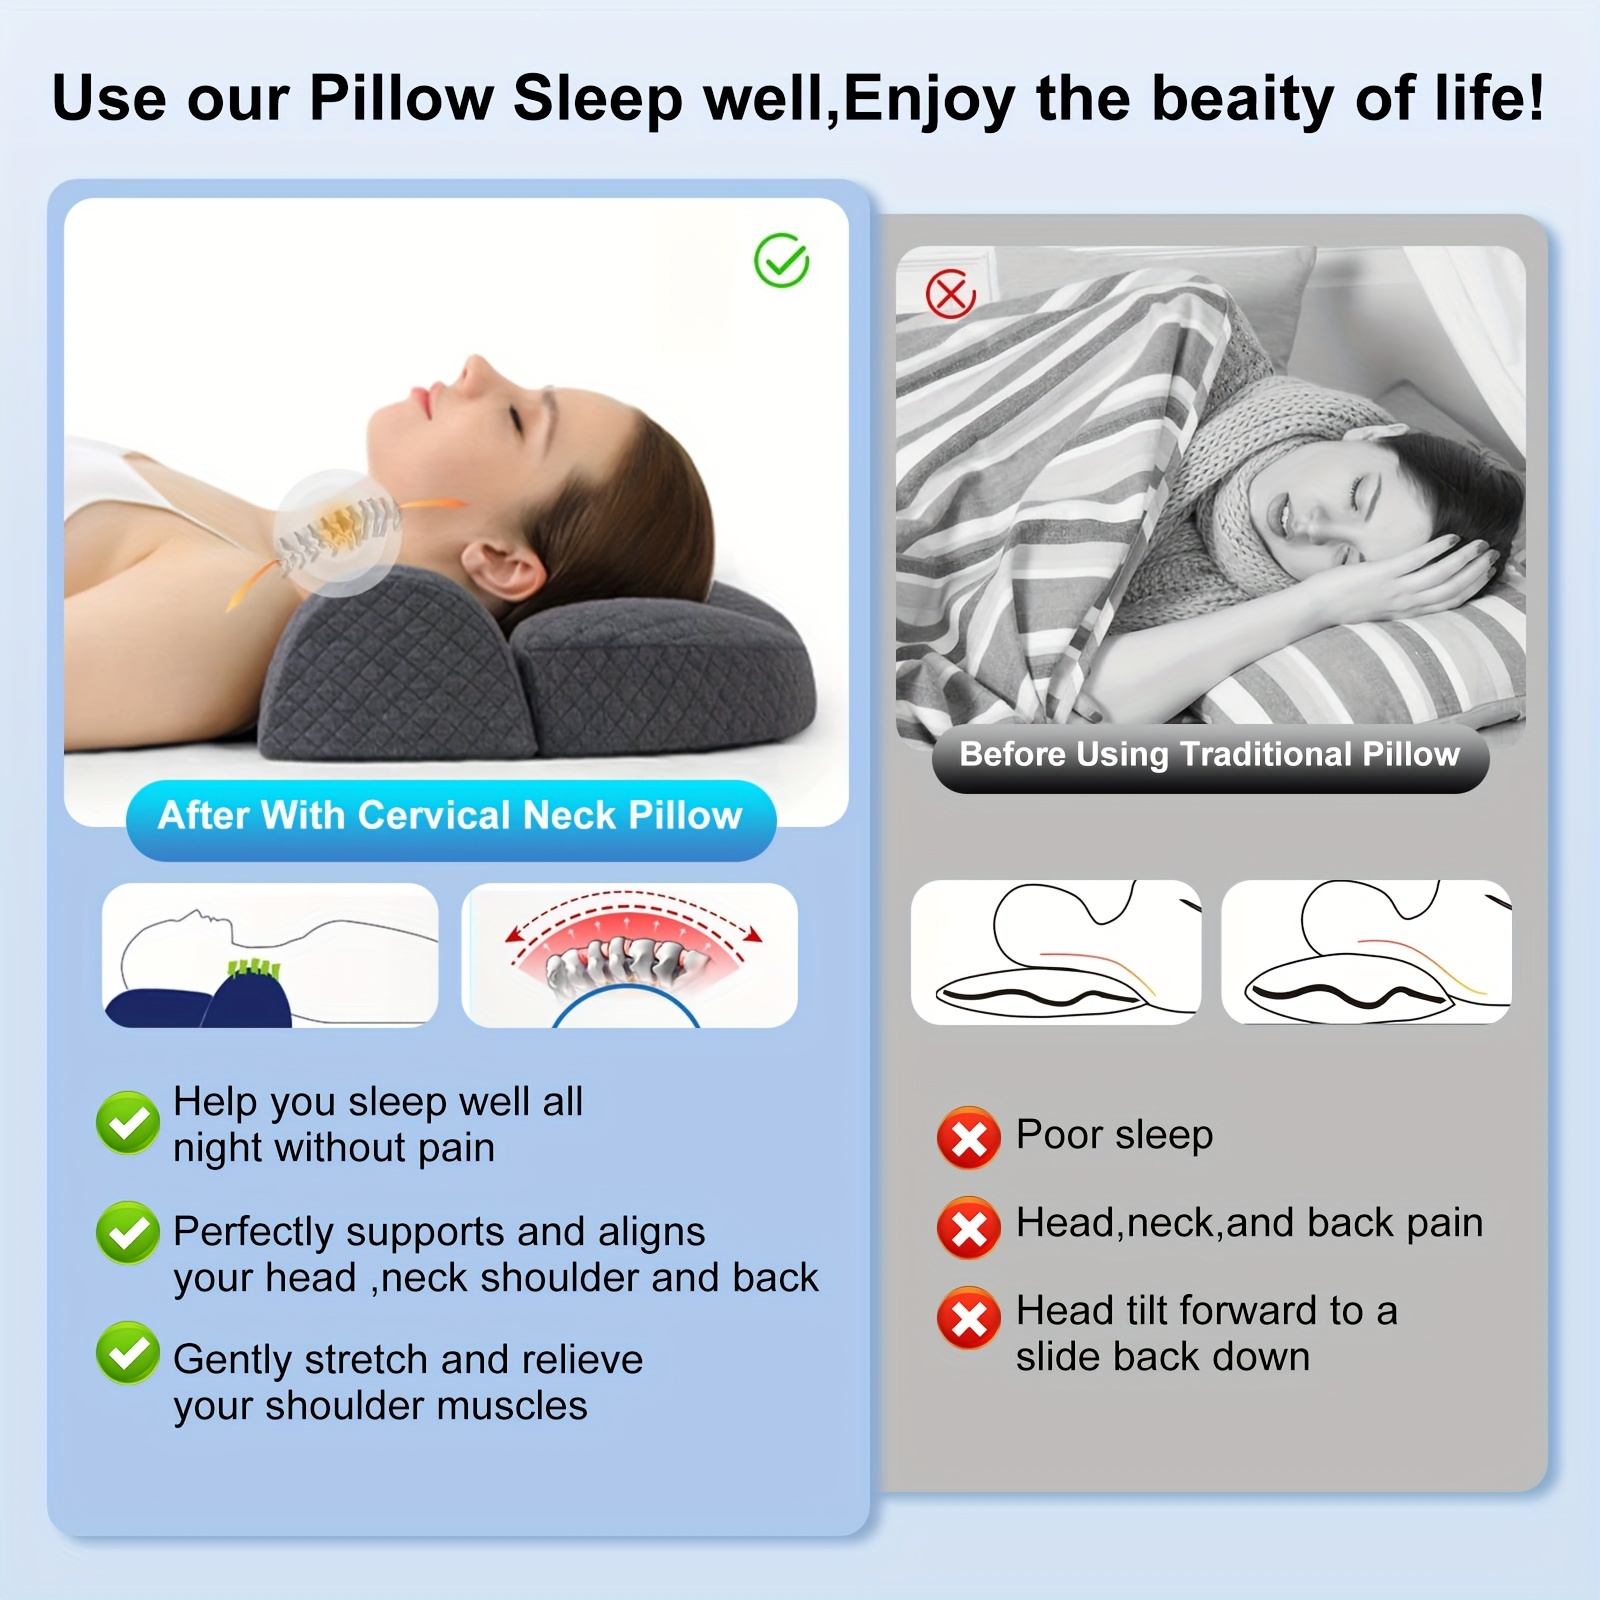 Cervical Neck Pillows for Pain Relief Sleeping, Ergonomic Built-in